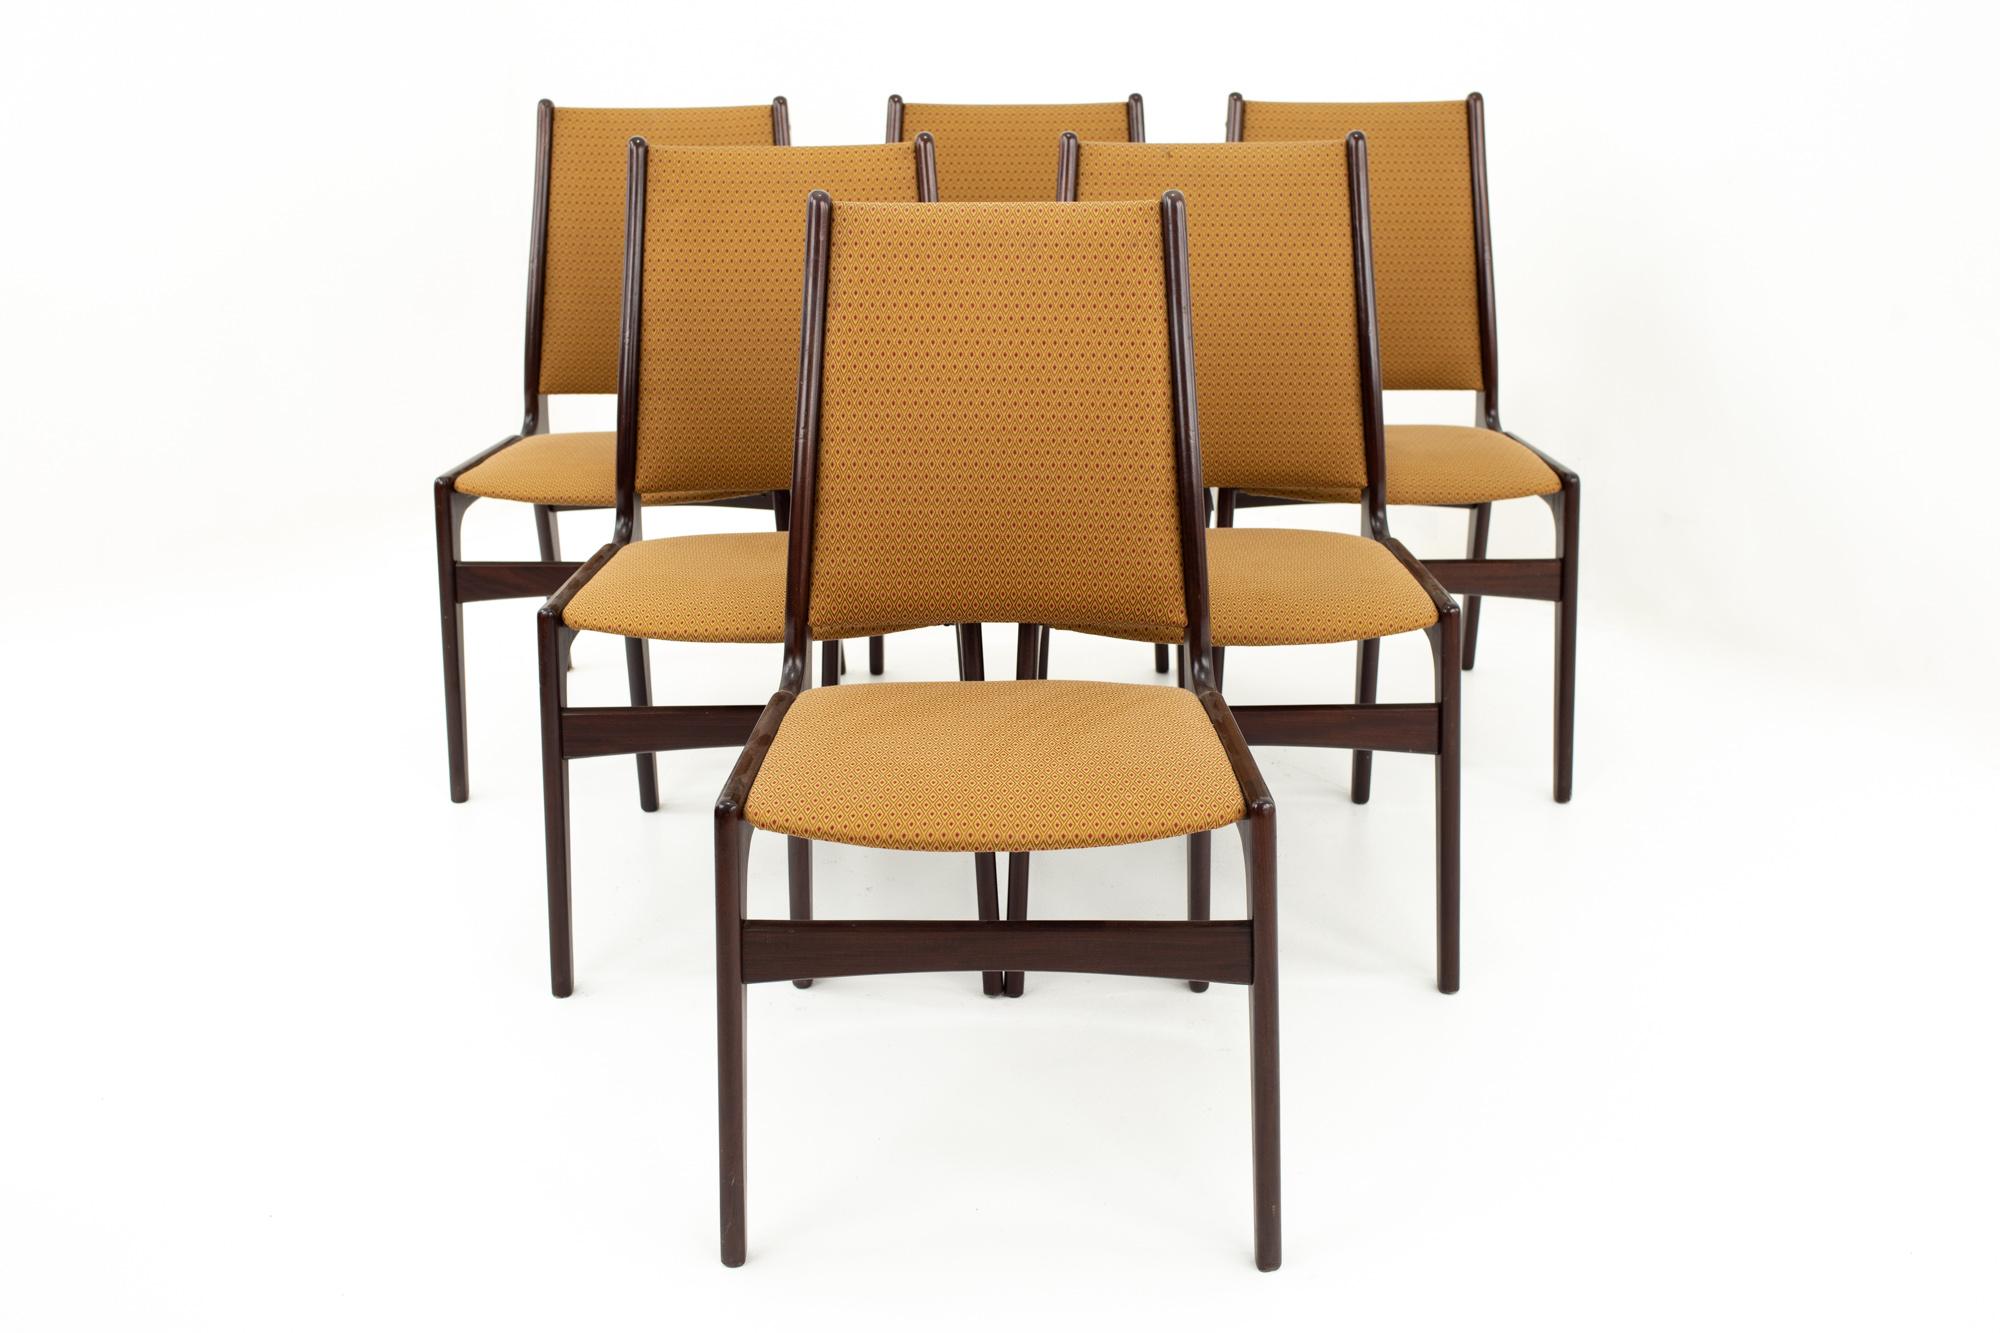 American Danish Midcentury Rosewood Dining Chairs, Set of 6